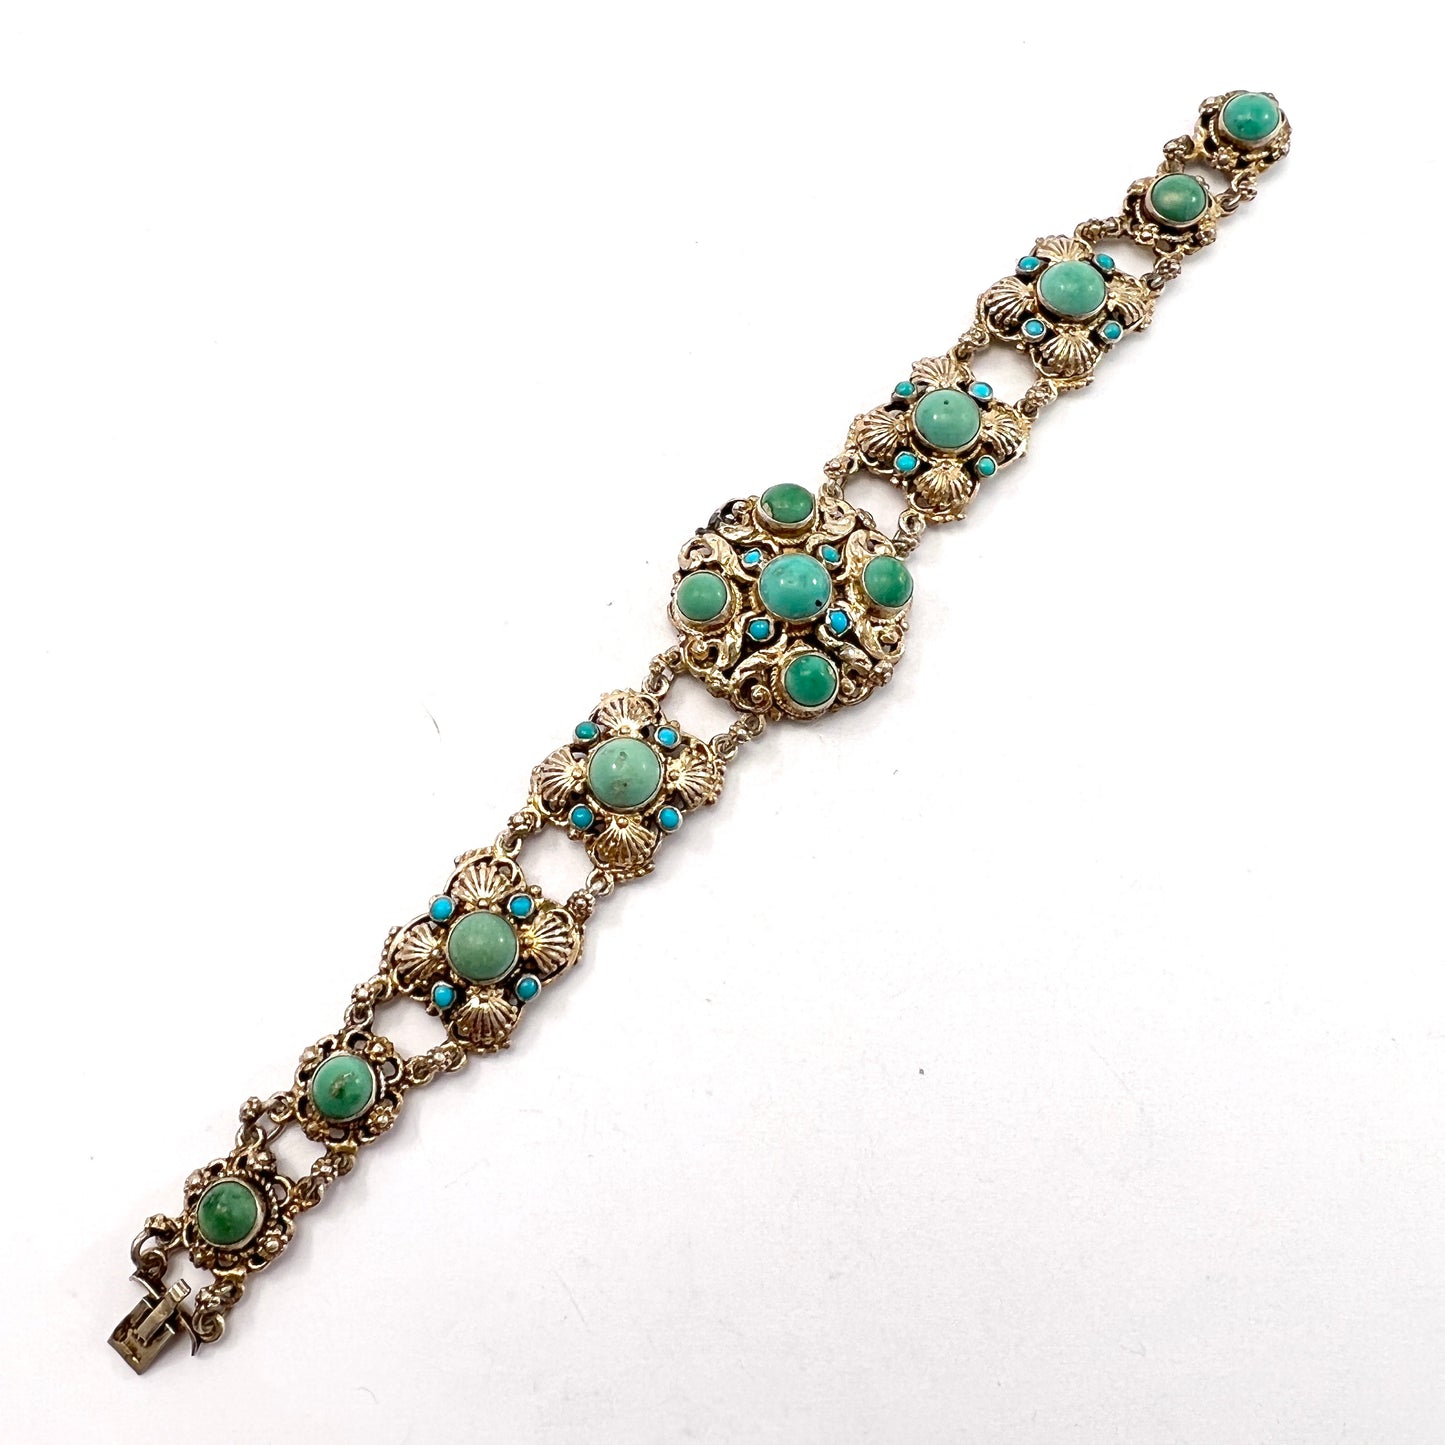 Czechoslovakia, Antique early 1900s Arts and Crafts Solid Gilt Silver Turquoise Bracelet.